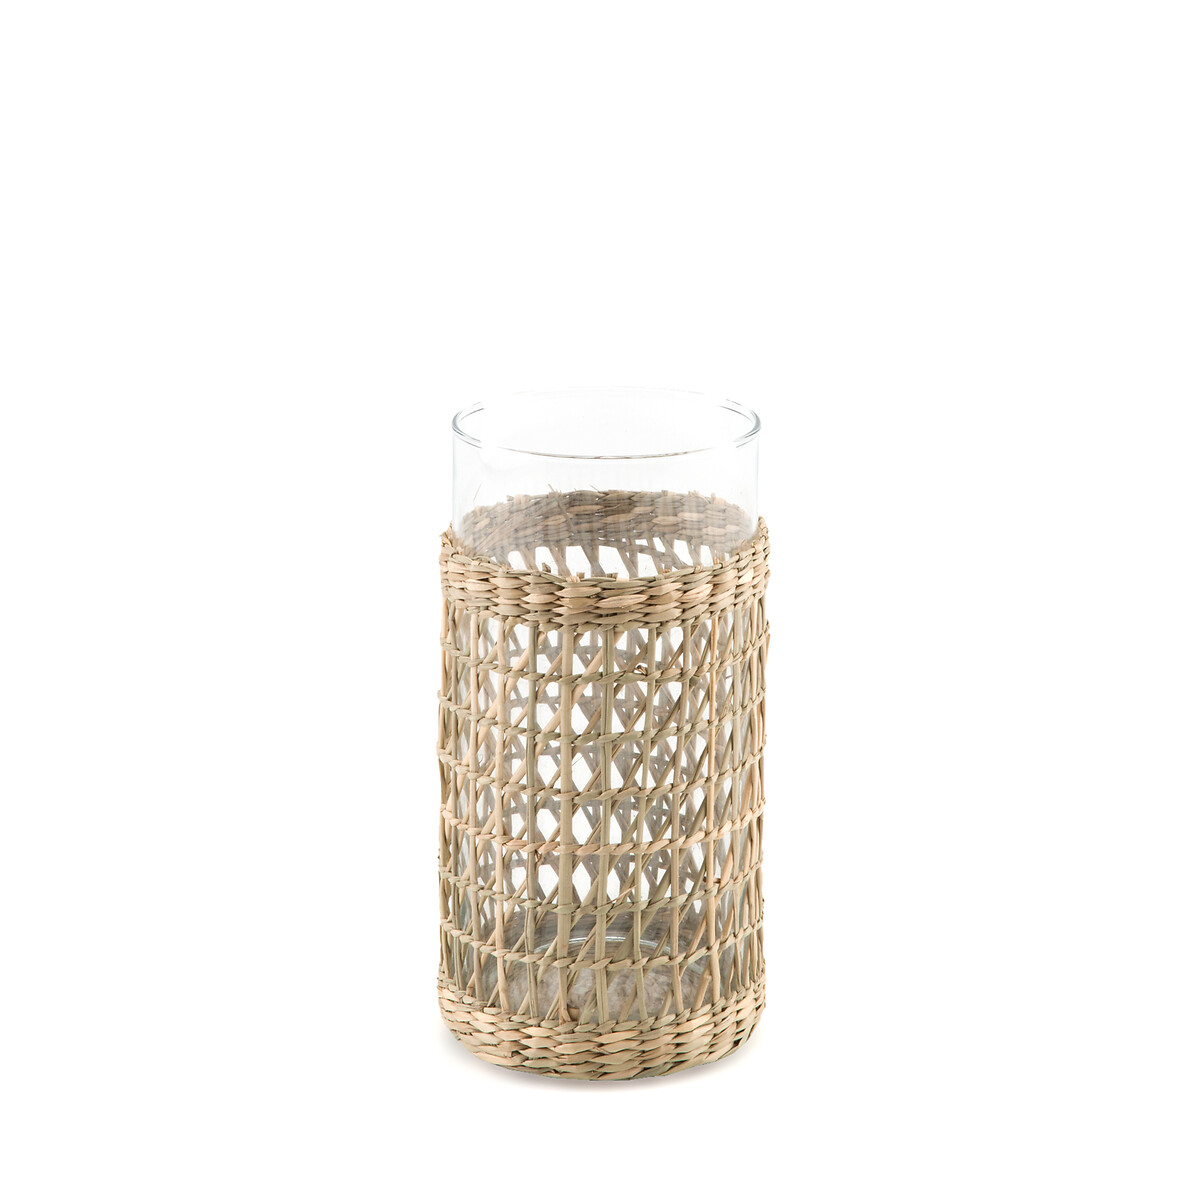 Kezia 20cm High Woven Straw and Glass Vase